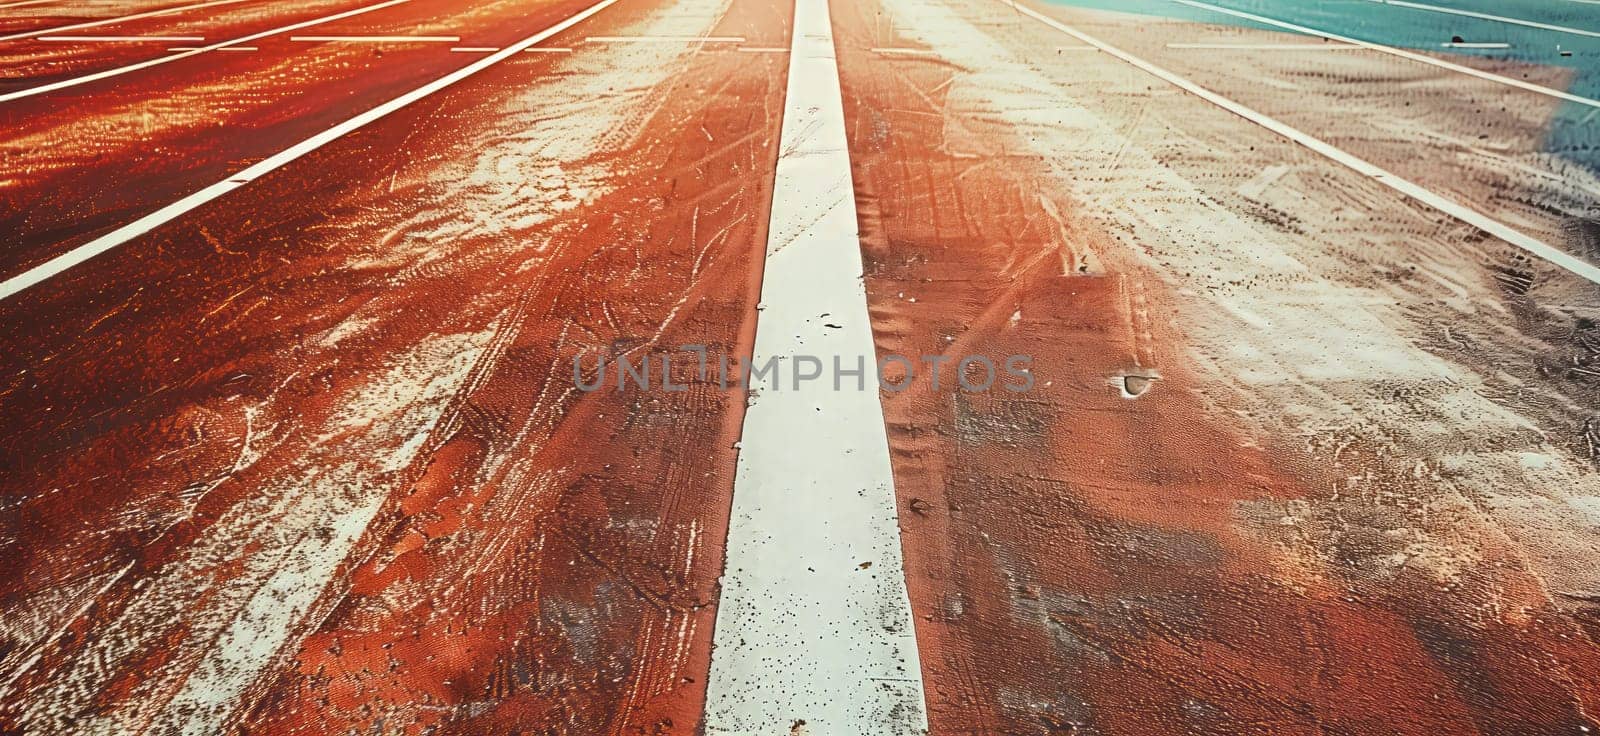 Close up shot of road surface with white line, surrounded by grass and trees by richwolf